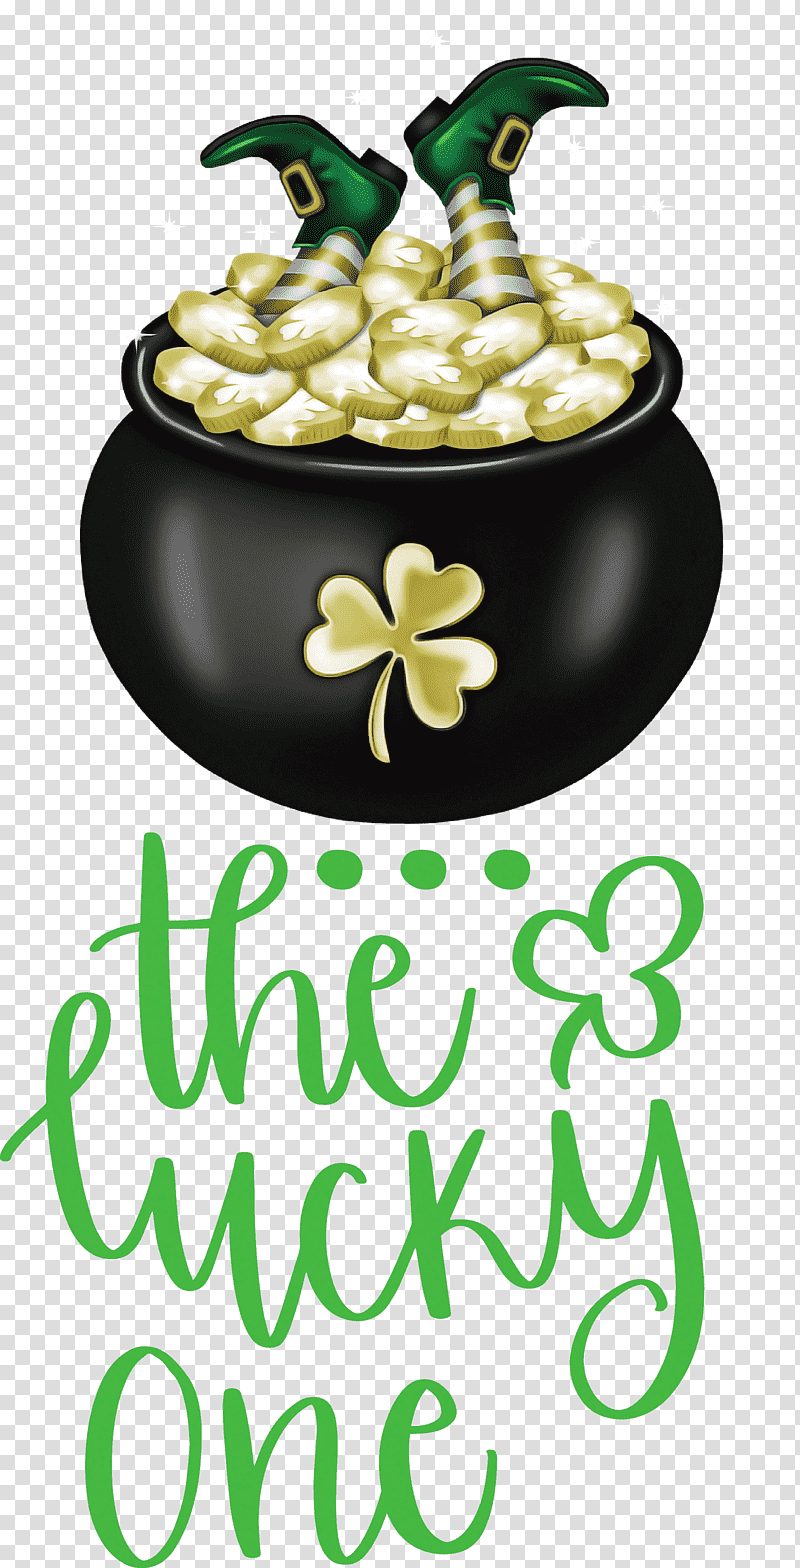 lucky one Lucky St Patricks Day, Vegetable, Tree, Cookware And Bakeware, Meter, Fruit, Mitsui Cuisine M transparent background PNG clipart